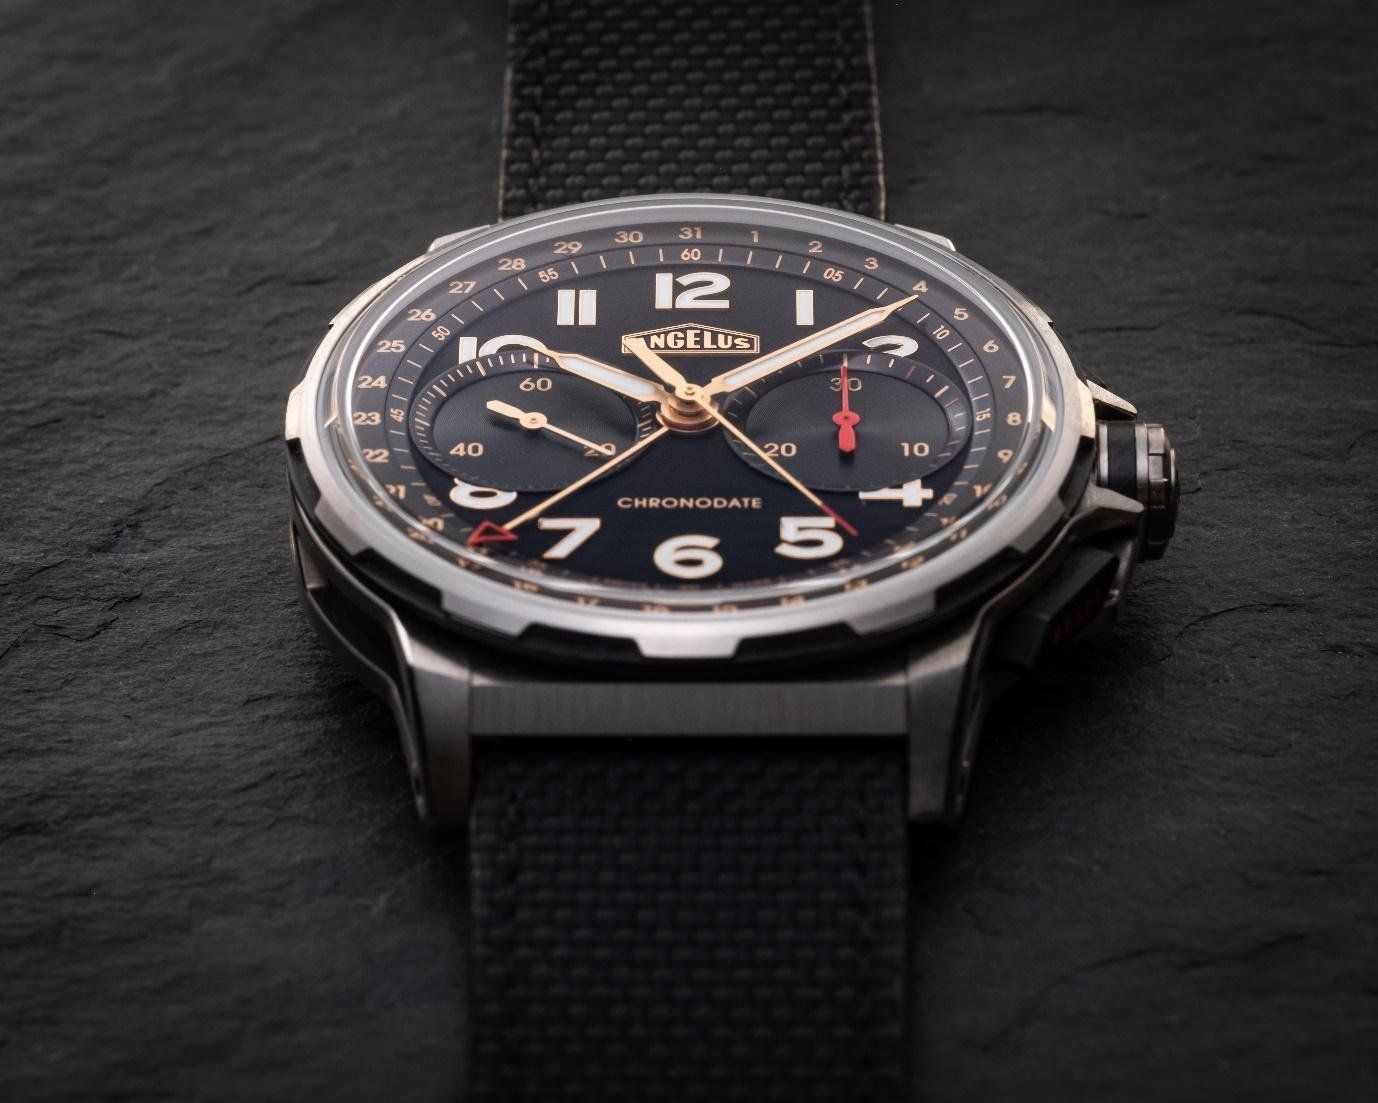 The Angelus Chronodate features a modular-styled case construction